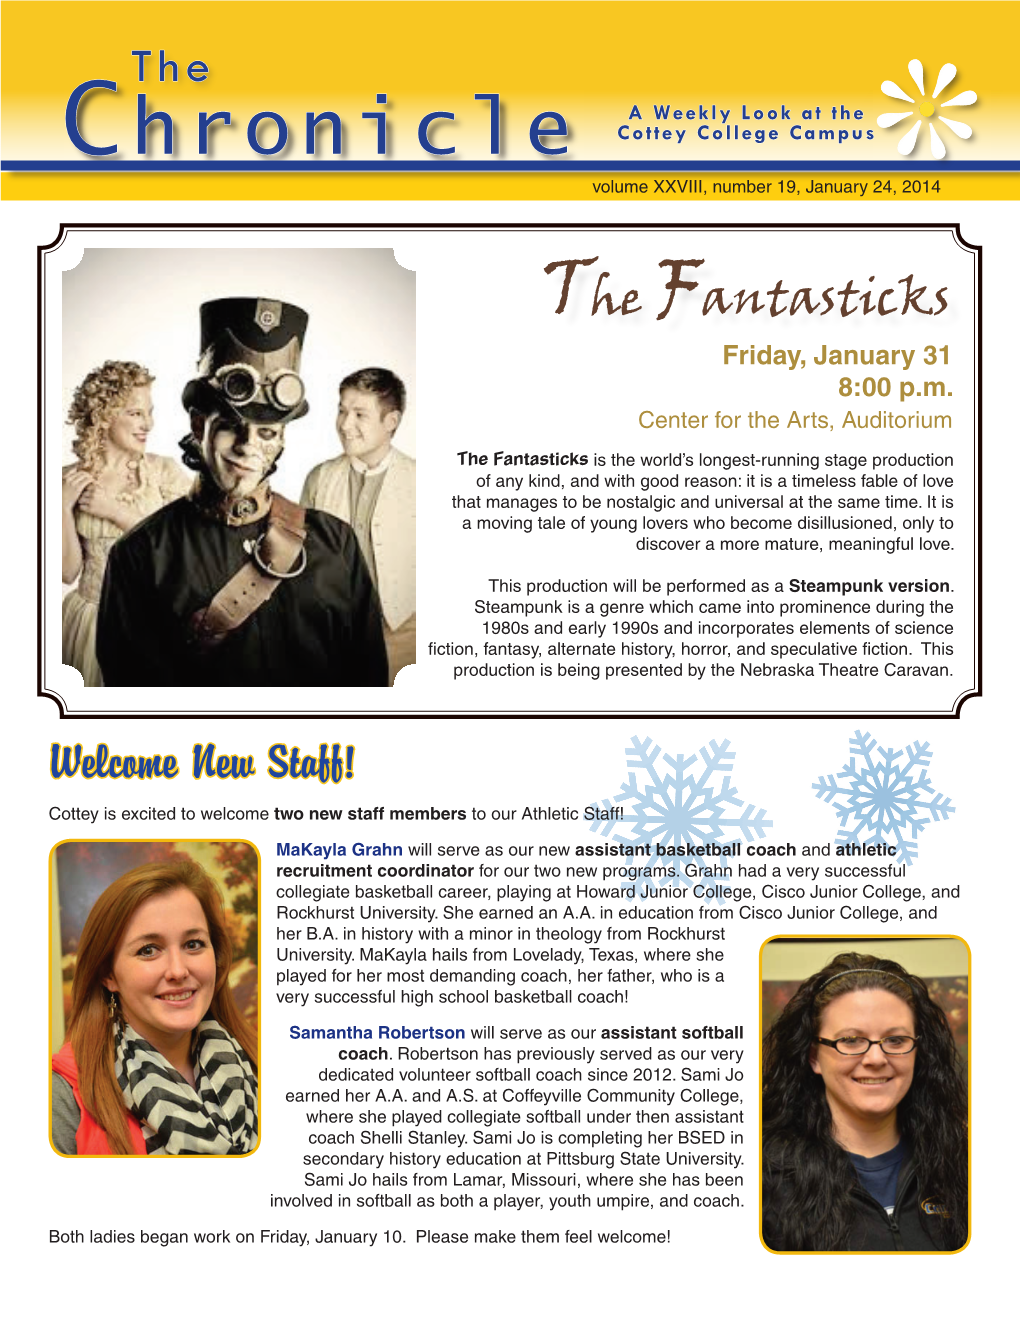 The Fantasticks Welcome New Staff!